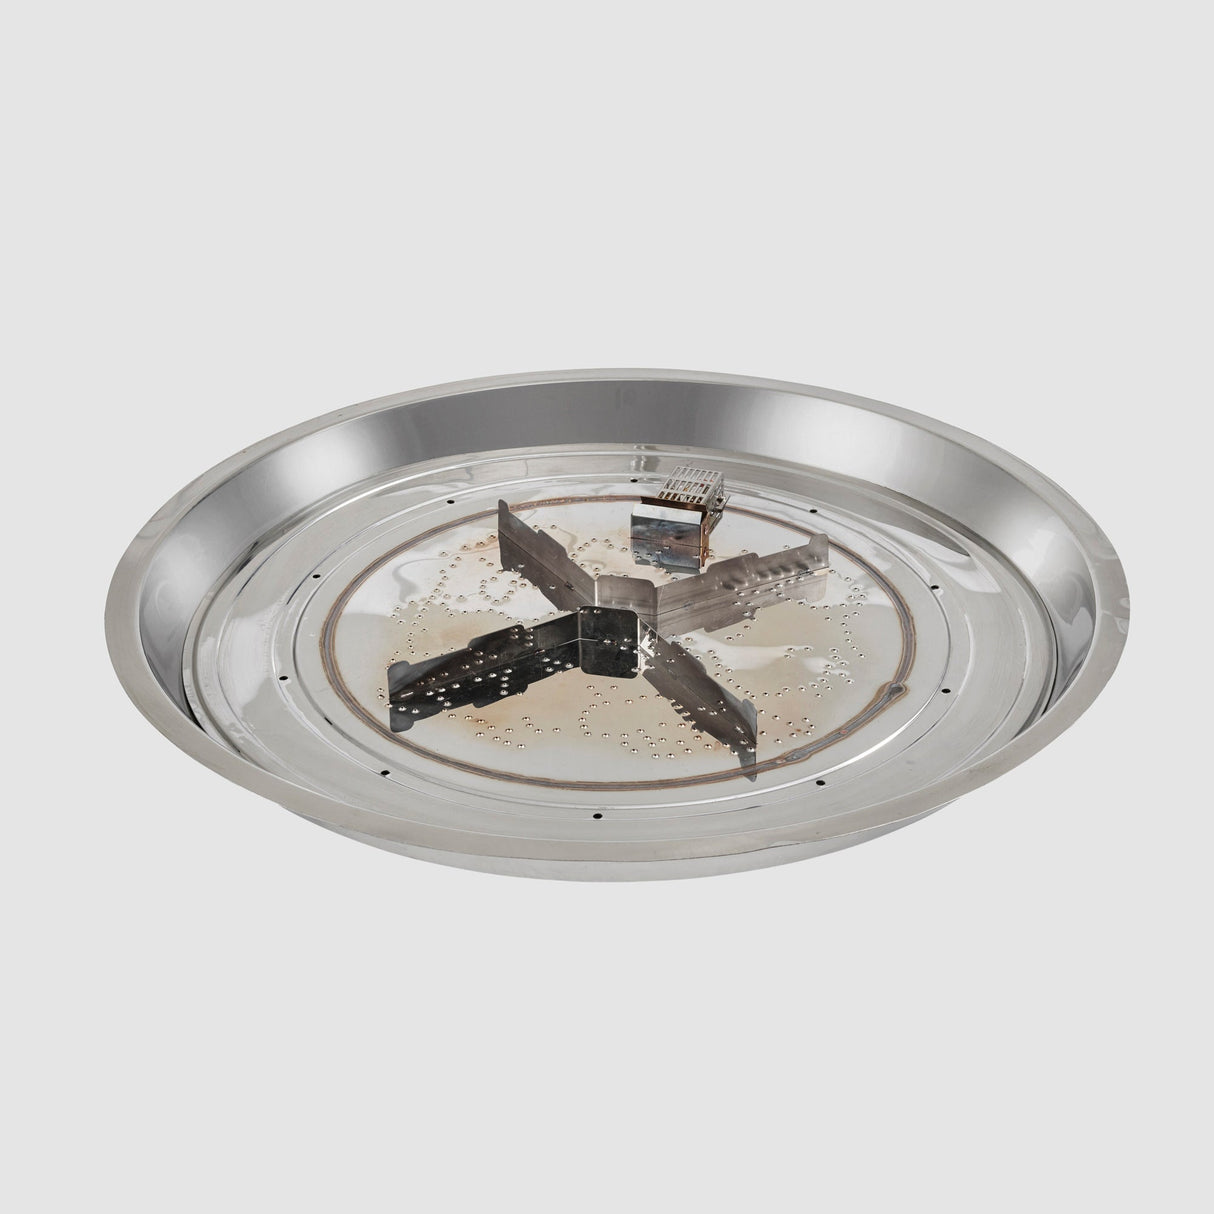 The 30" Crystal Fire Plus Round Gas Burner on a grey background